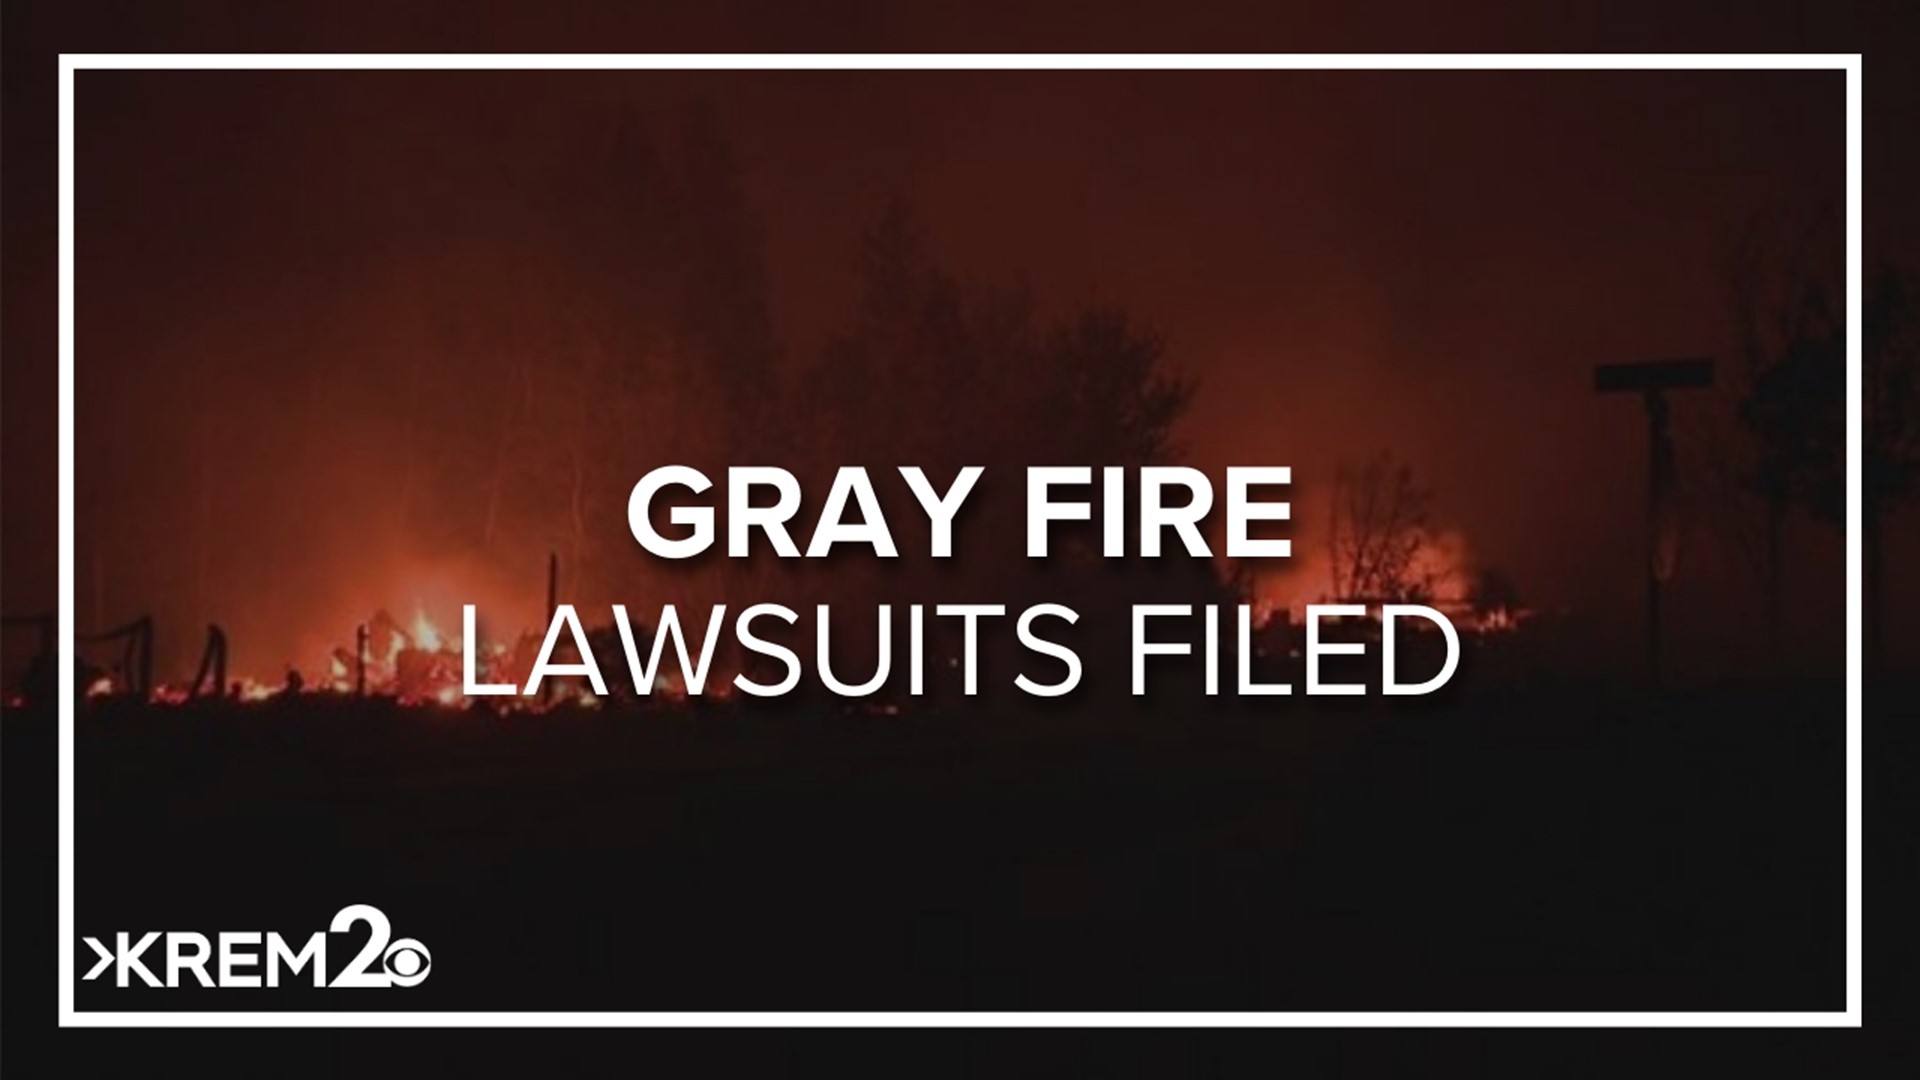 Two new lawsuits have been filed, placing Inland Power & Light at fault for the Gray fire that burned over 11,000 acres and destroyed over 240 structures.